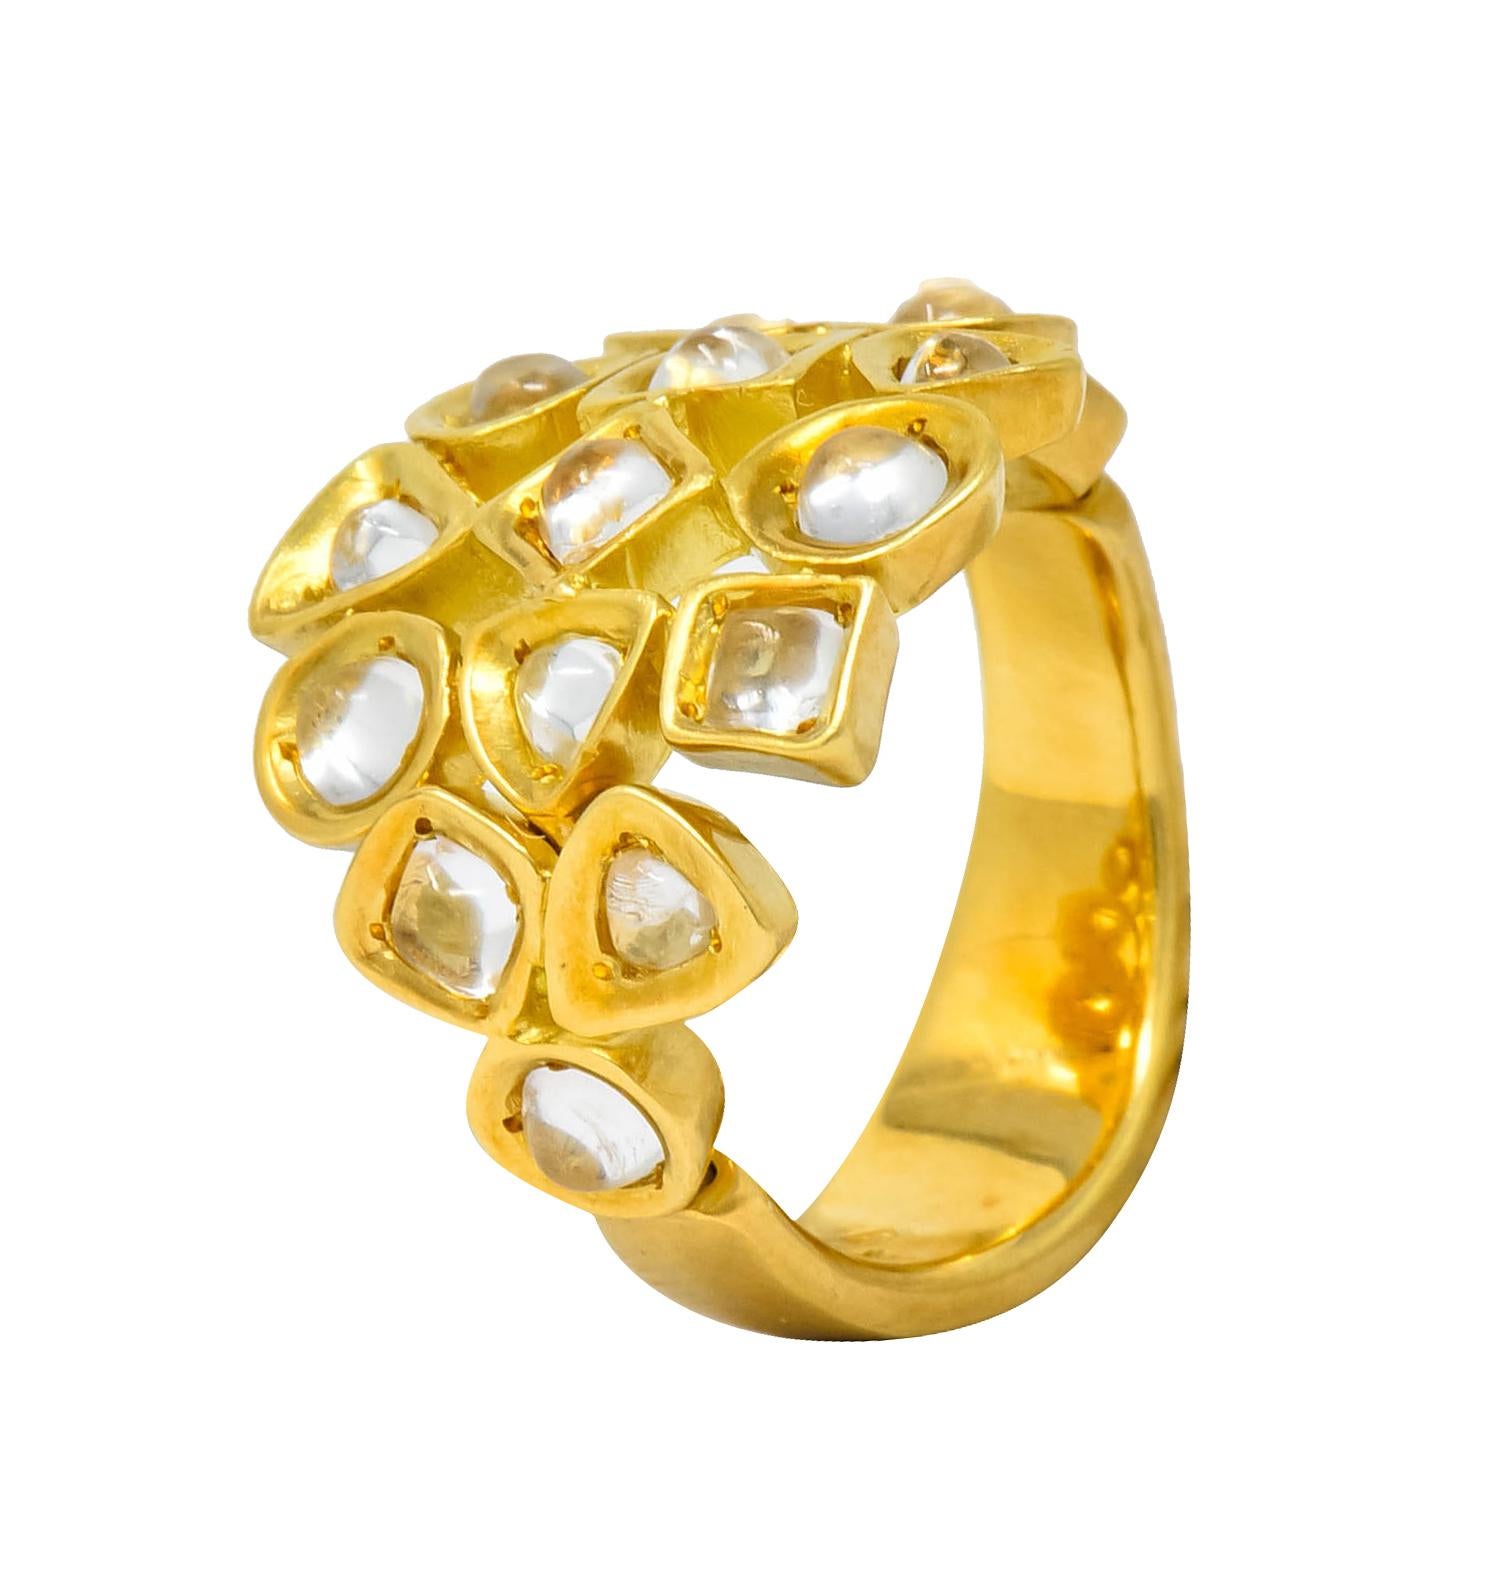 Designed as interlocking, concave, geometric shapes, each centering a small cabochon rock crystal

Satin finished with top of ring articulating with mesh-like movement

Maker's mark for H. Stern and stamped 750 for 18 karat gold

Circa 1970's

Ring